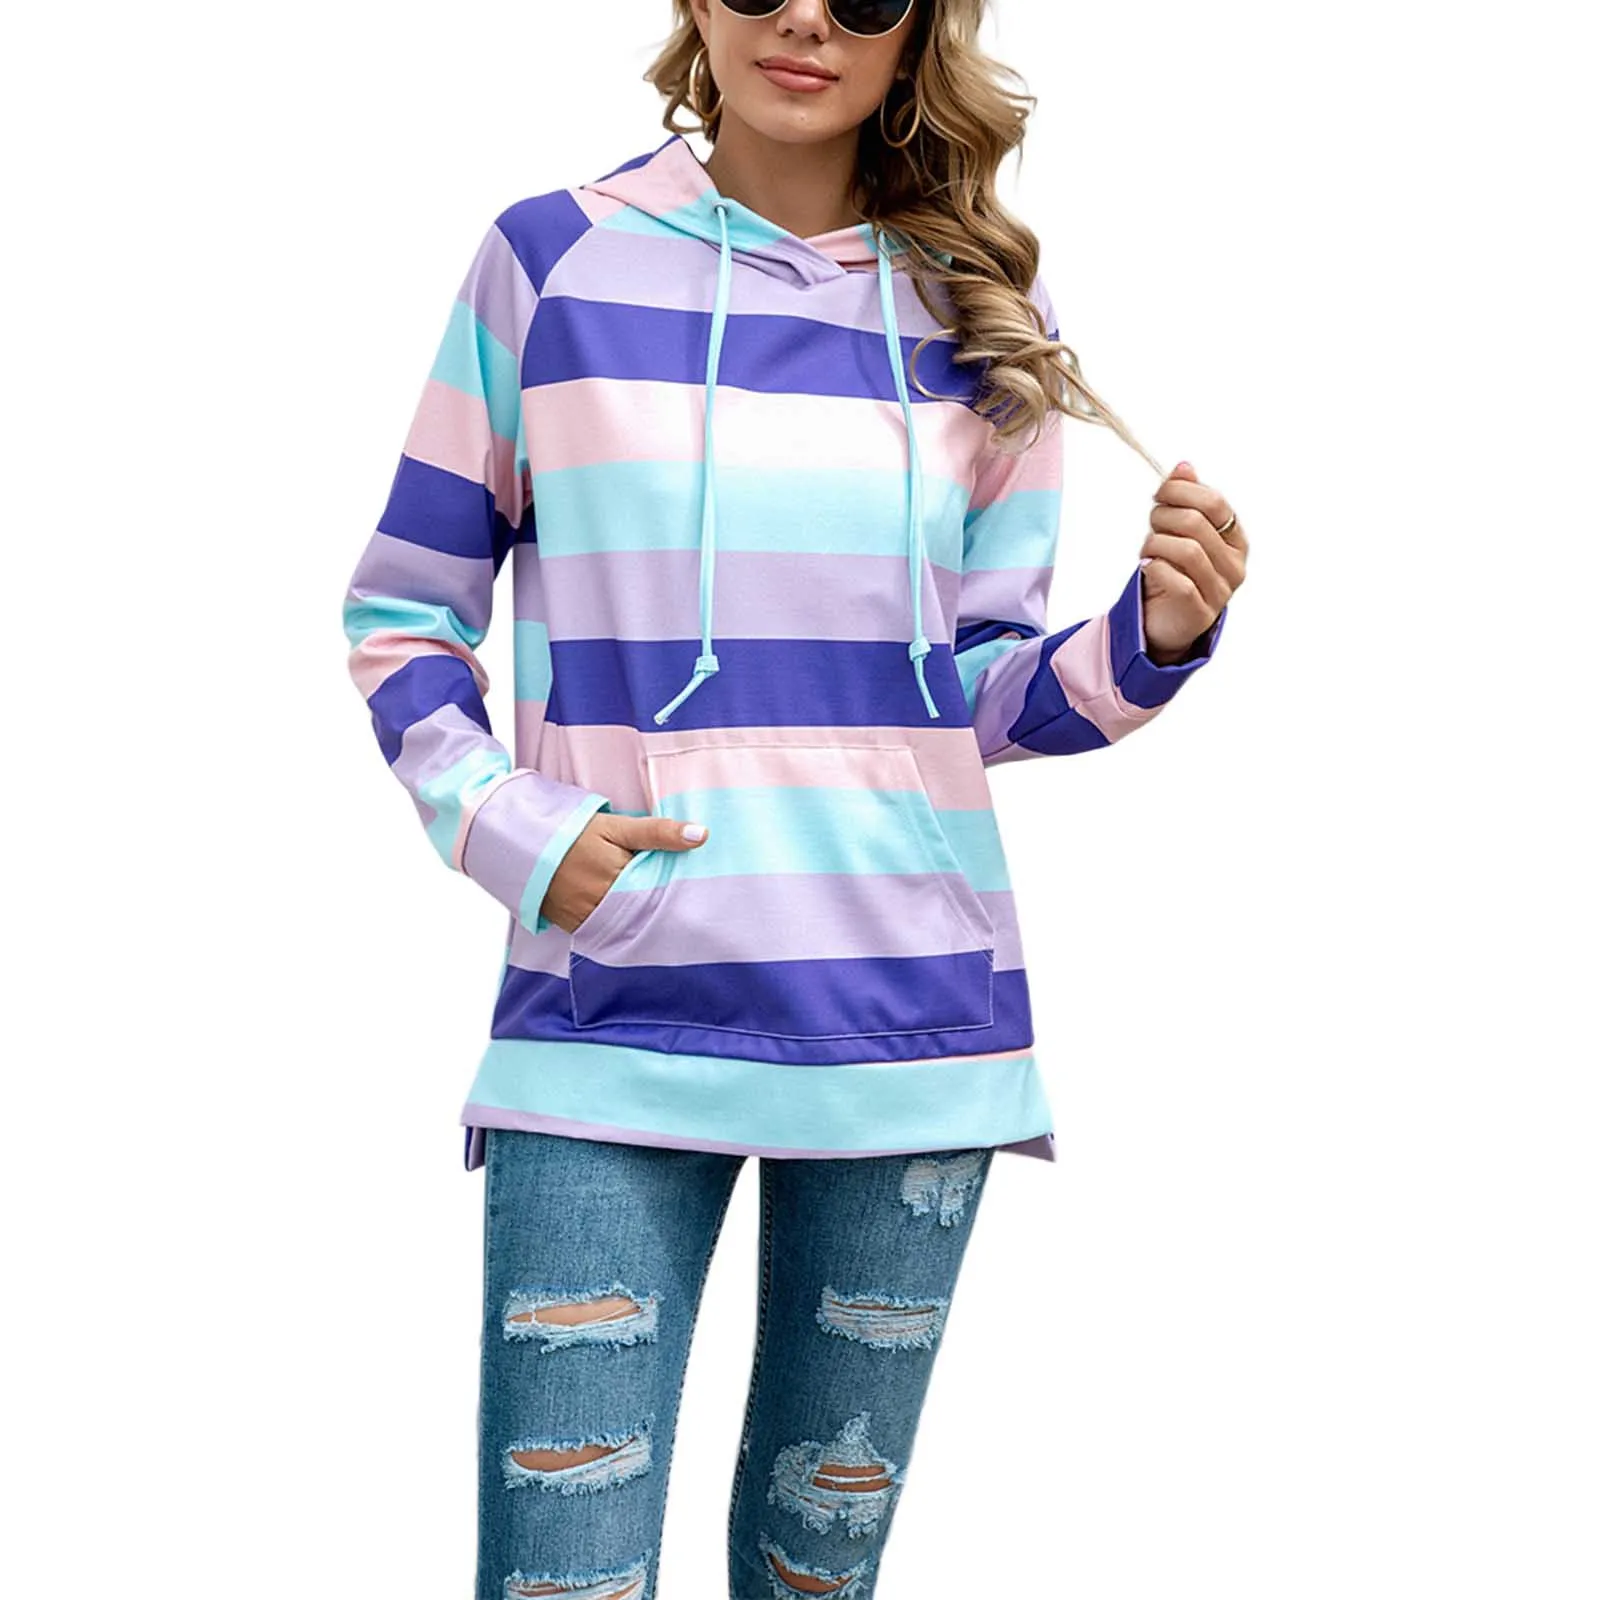 

Women's Sweater, Long Sleeve Pocket Hooded Top for Travelling Vacation Dating Party Shopping